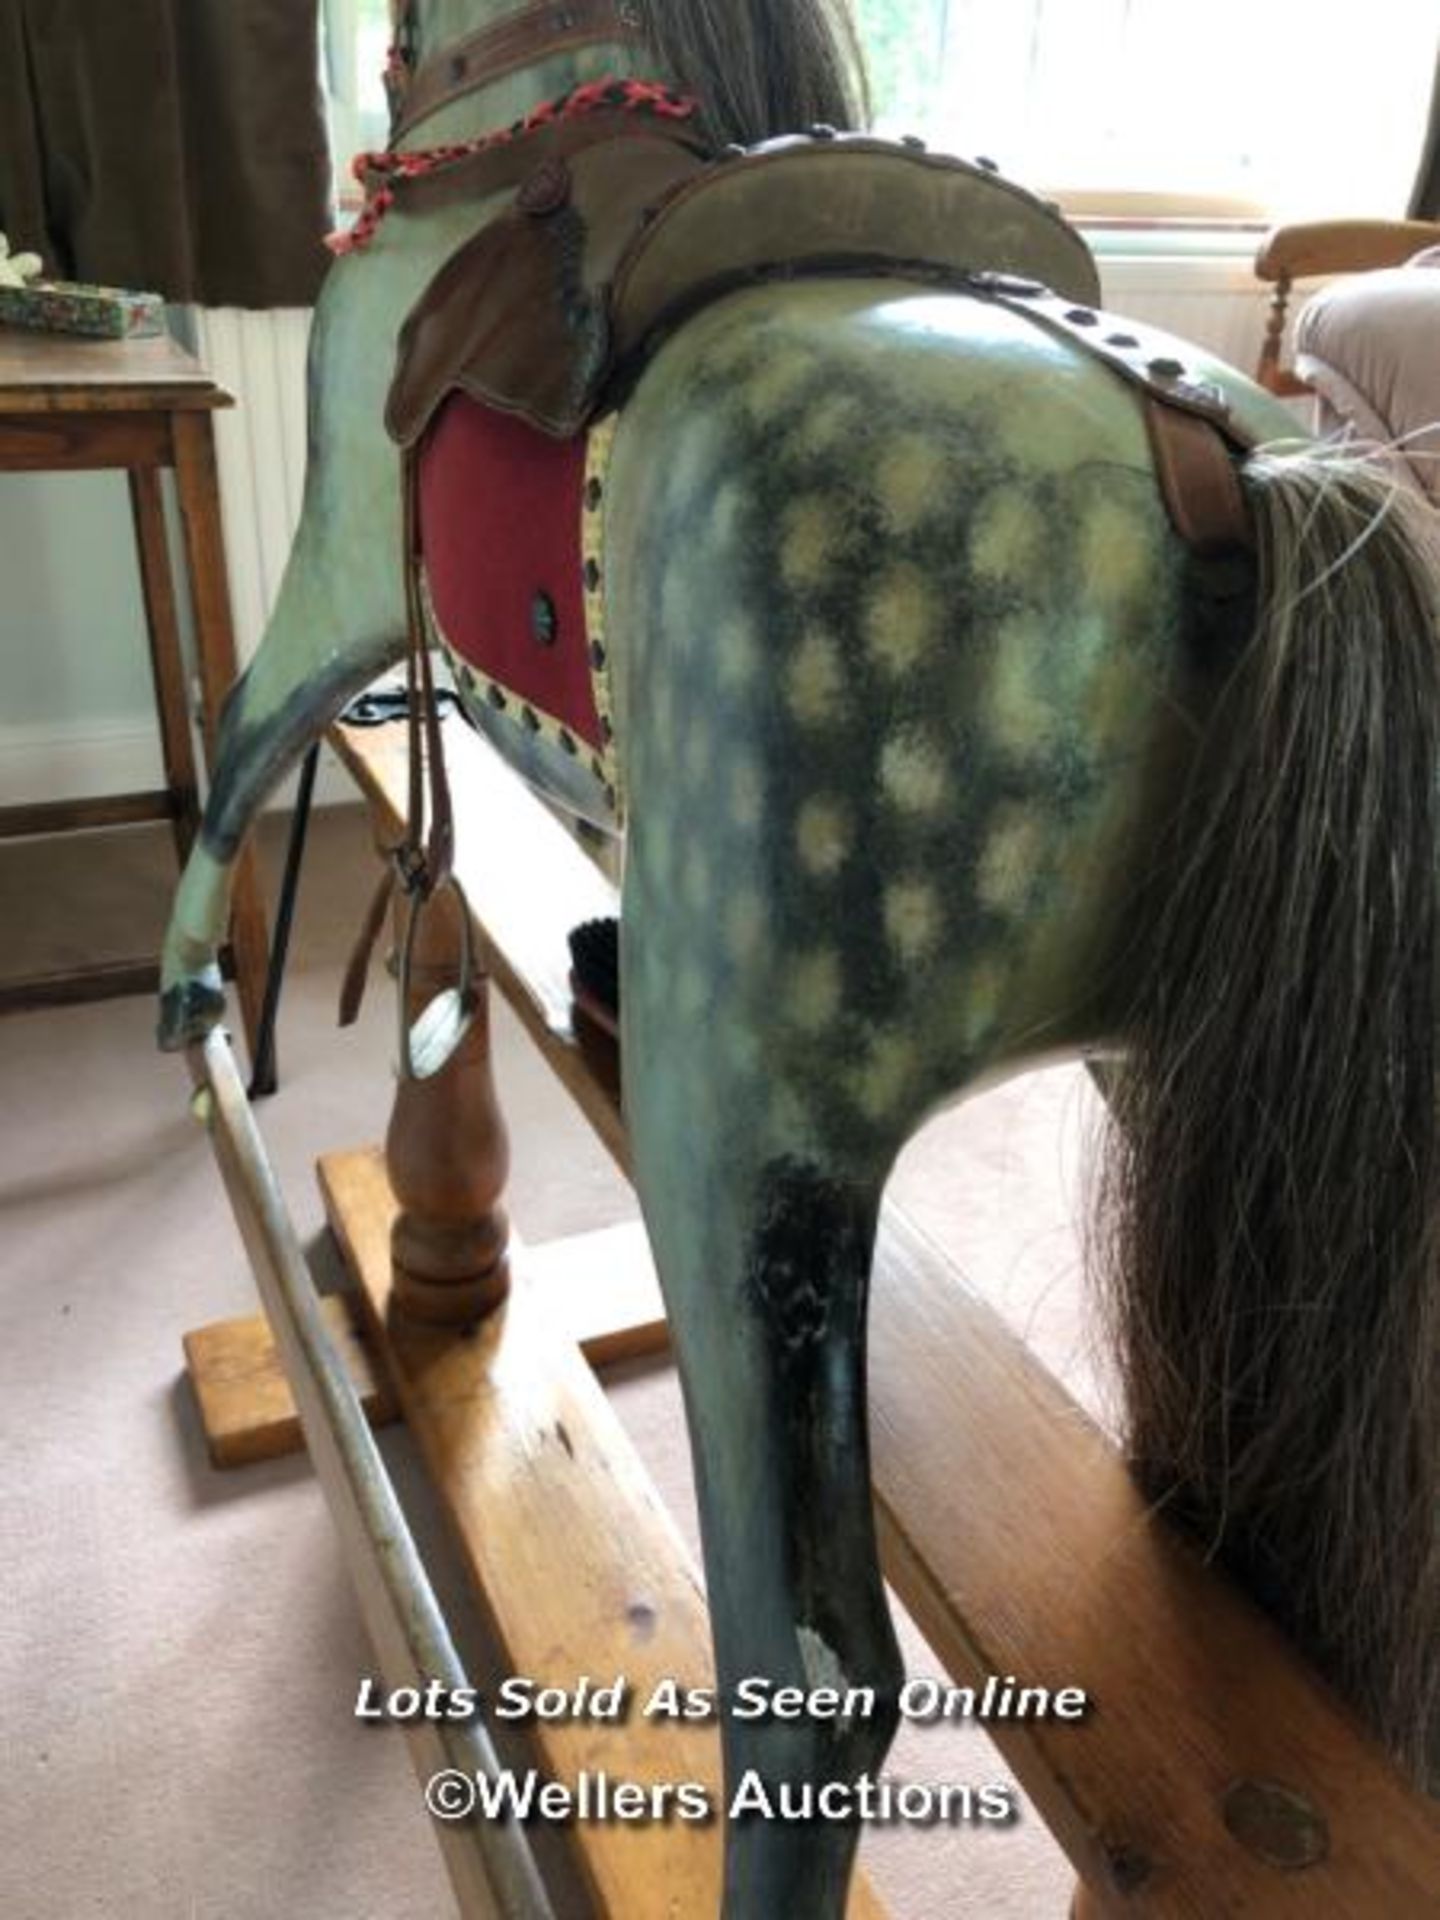 ANTIQUE ROCKING HORSE, BY F.H. AYRES LONDON C1910 - 1920, RESORED IN 1990, 128 X 40 X 110CM, - Image 5 of 7